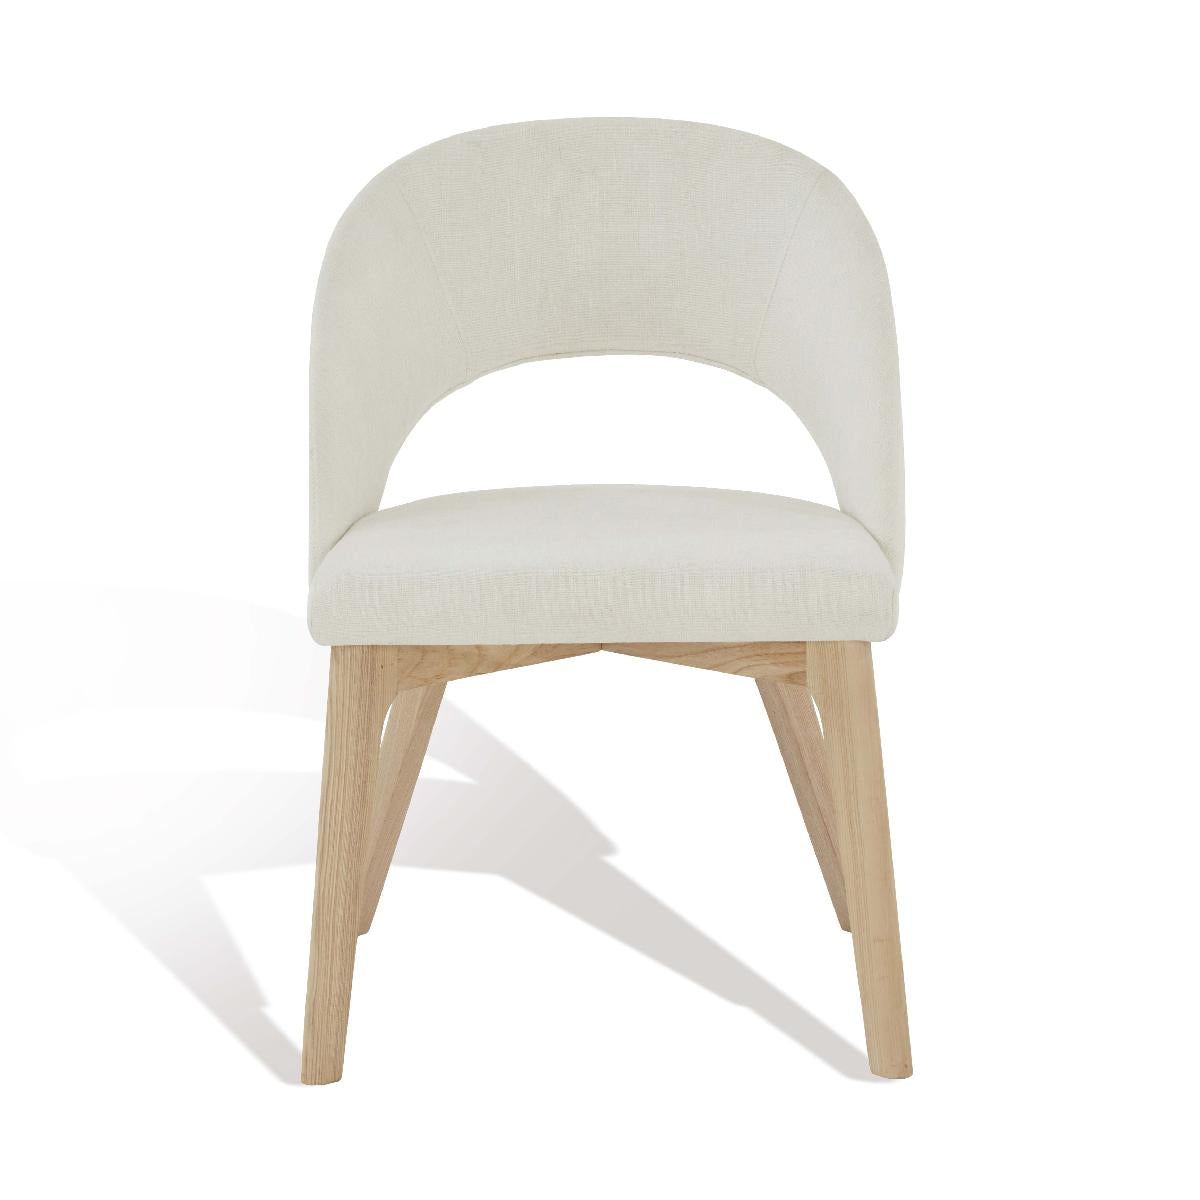 Safavieh Couture Rowland Linen Dining Chair - Ivory / Natural